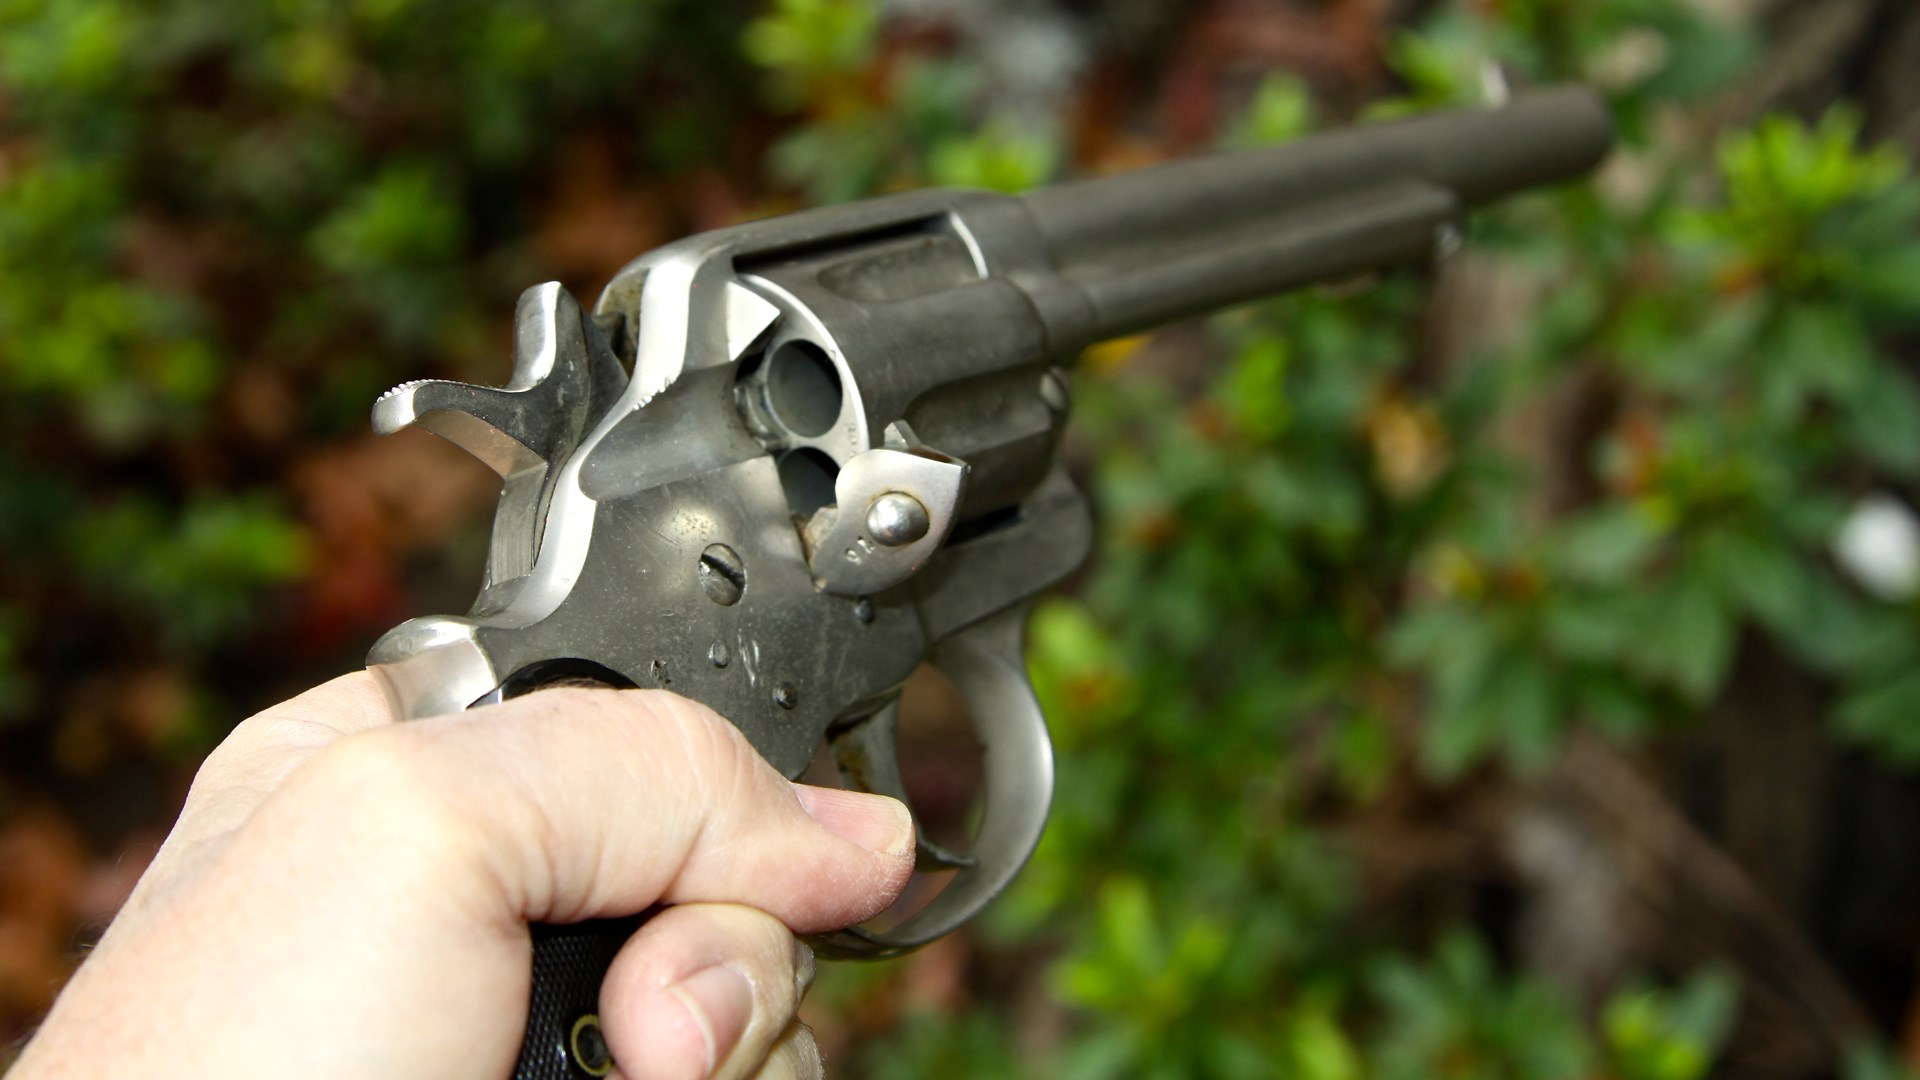 Prior to the advent of the S&W Hand Ejector double actions, the one-cartridge-at-a-time loading gate method was in vogue, as seen here on this Colt Model 1878 double-action revolver.